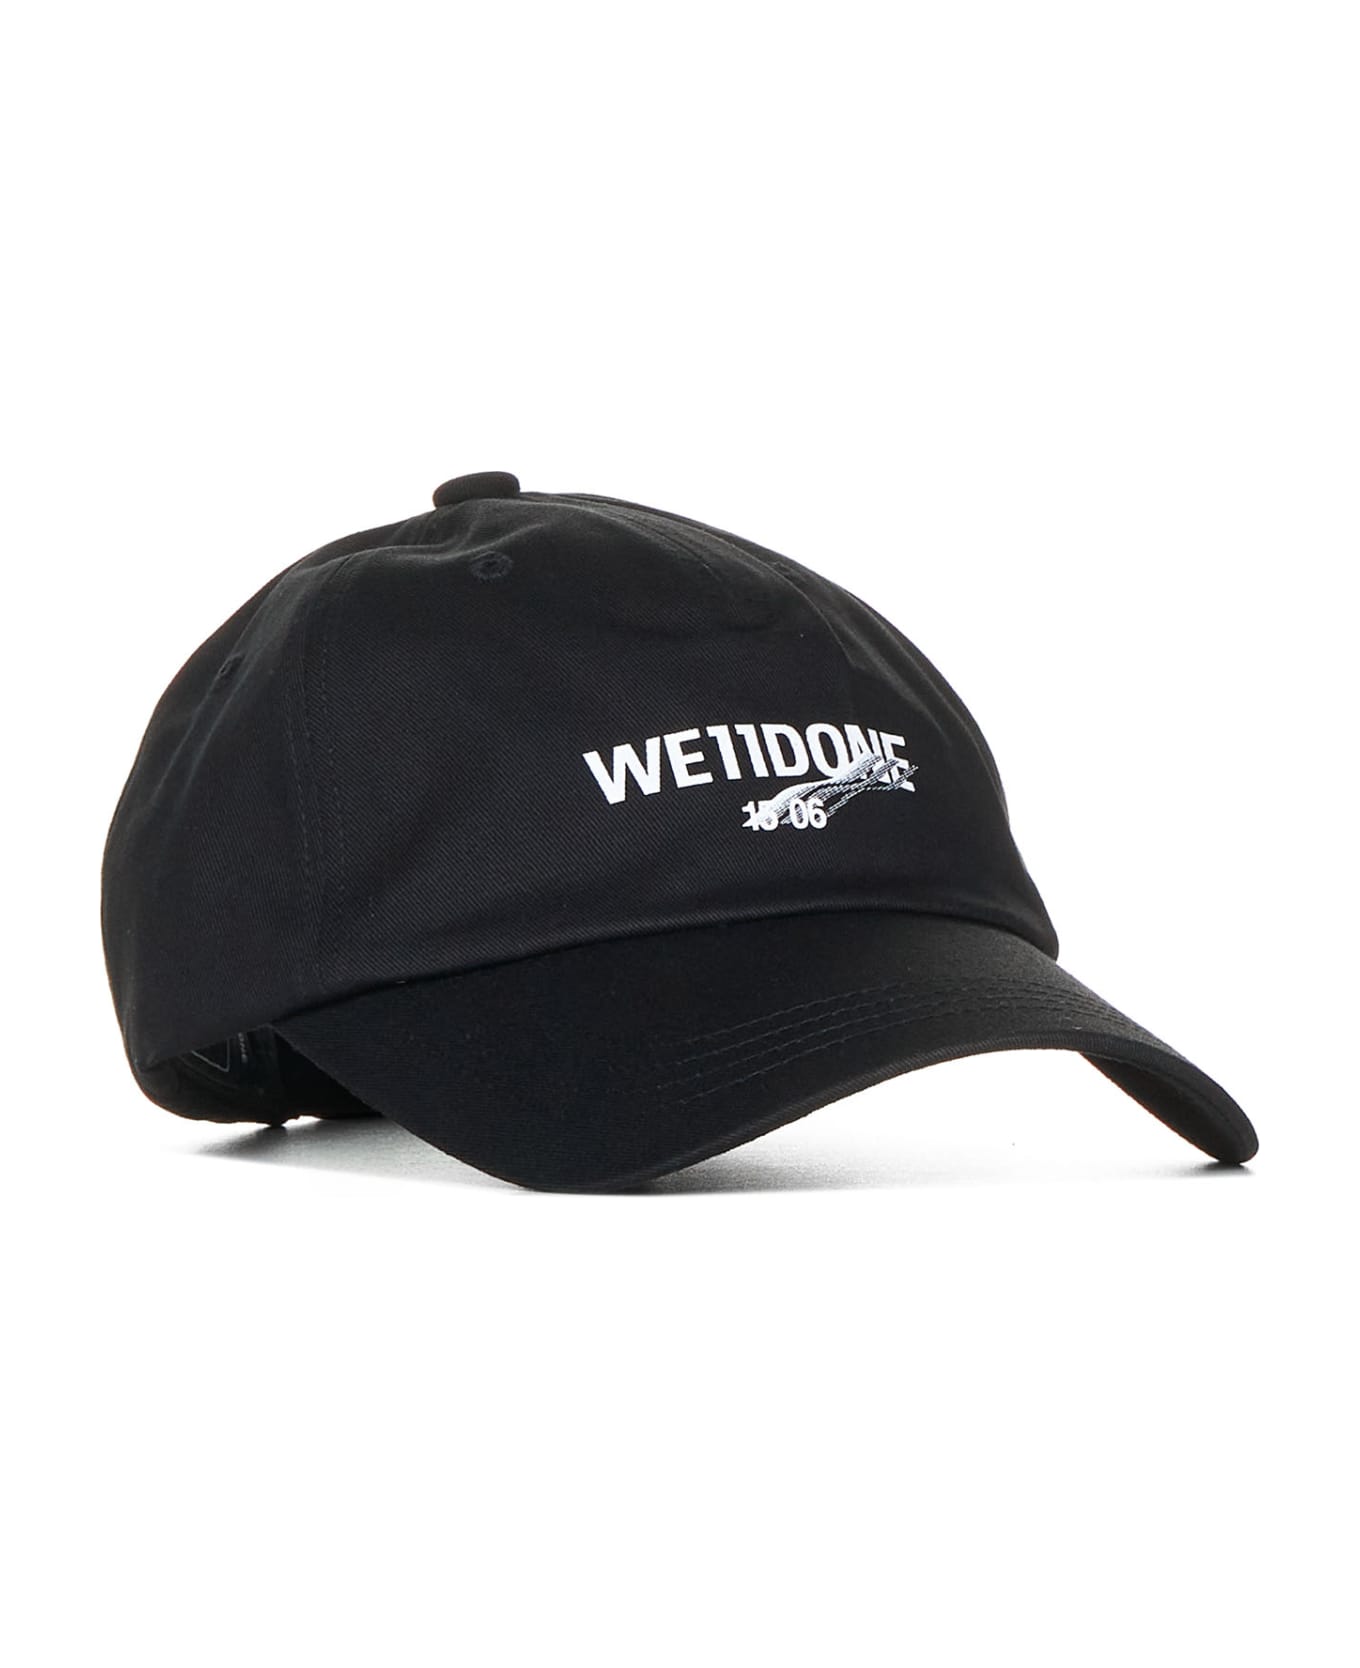 WE11 DONE Hat Rudolph - Black